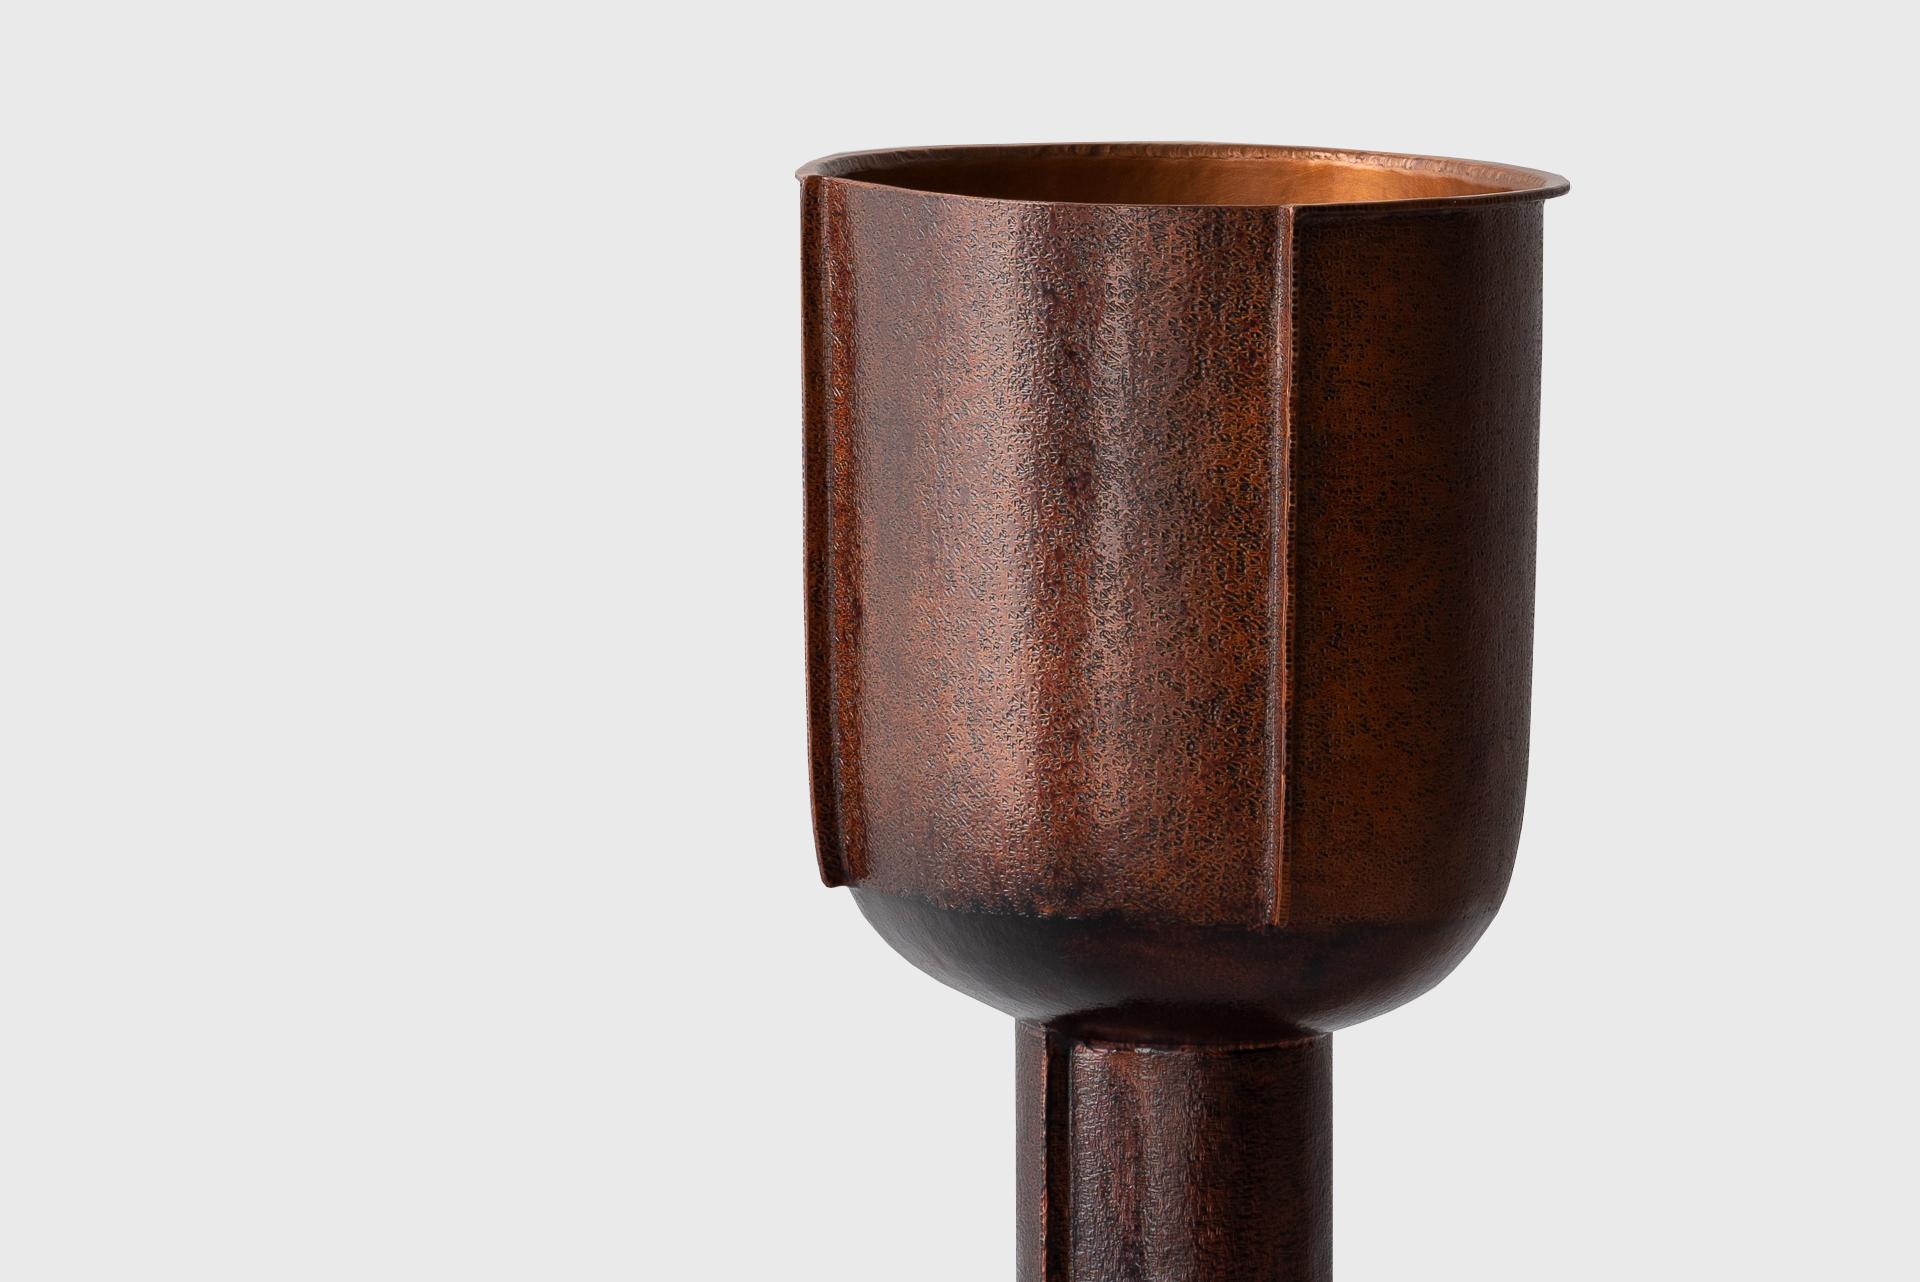 Contemporary Copper Vase 2, Textured Natural Dark Lacquer, Seung Hyun Lee, Korea In New Condition For Sale In Barcelona, ES